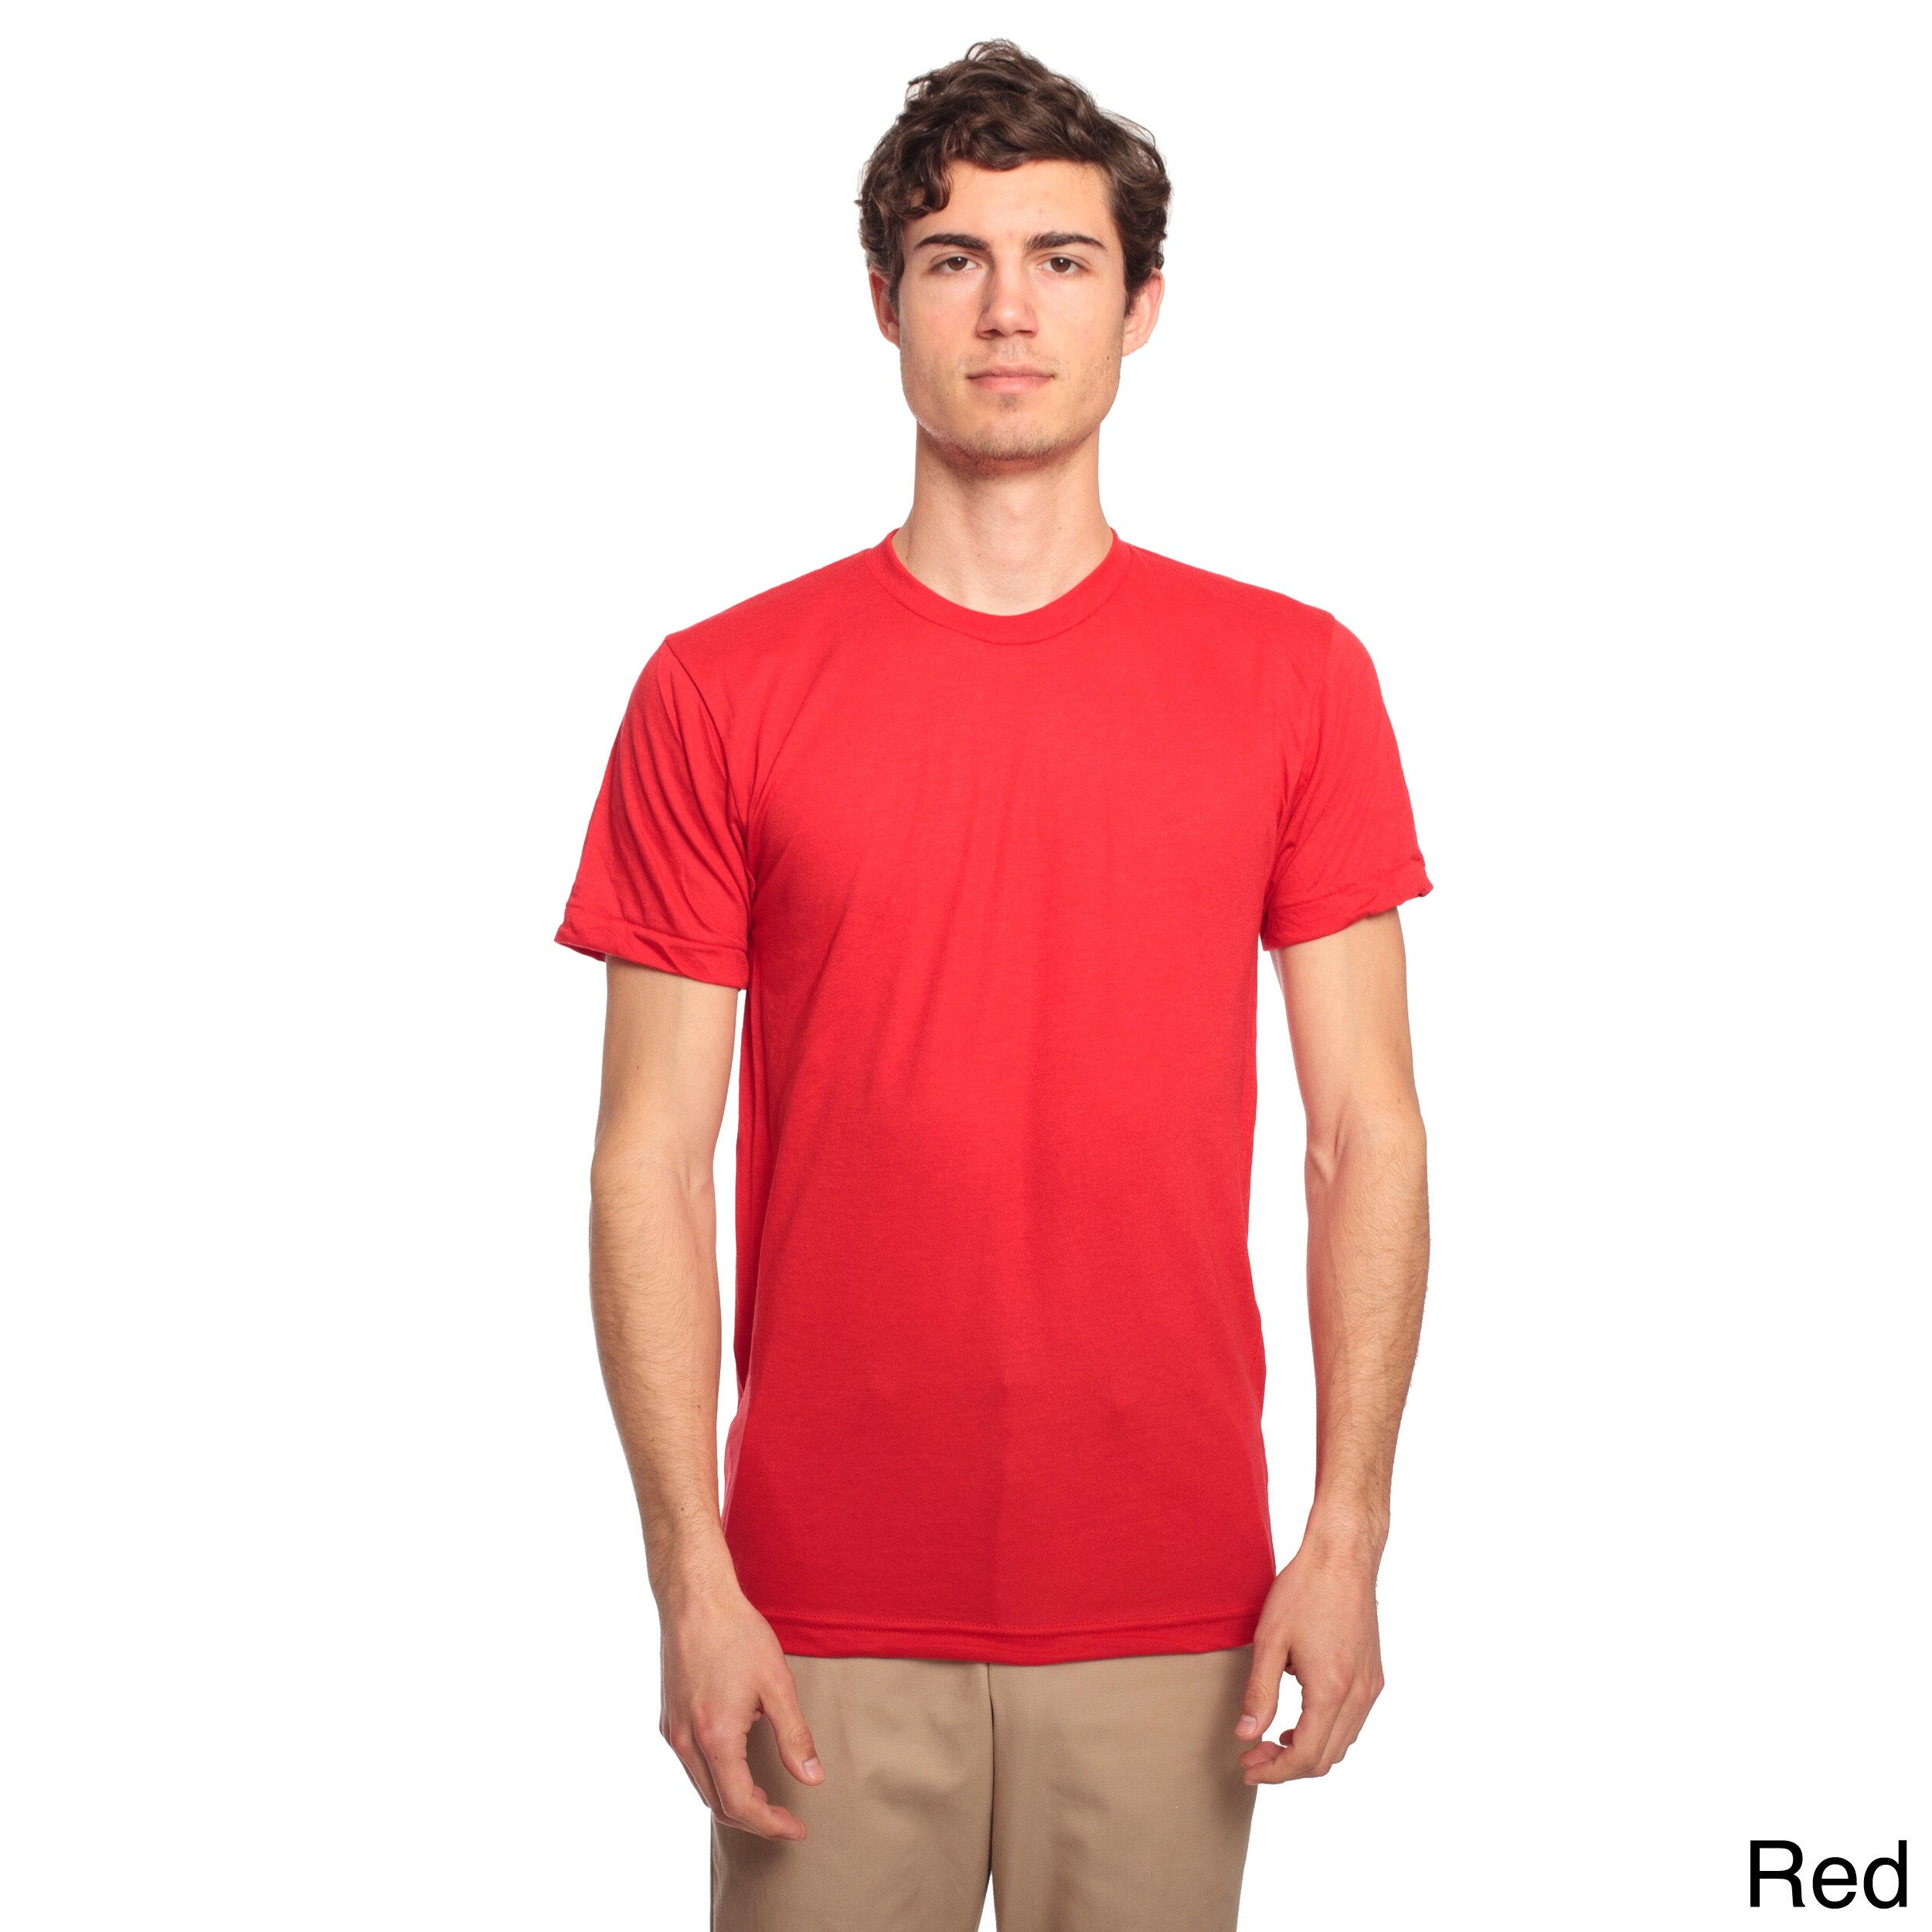 American Apparel American Apparel Unisex Poly cotton Crew Neck T shirt Red Size XS